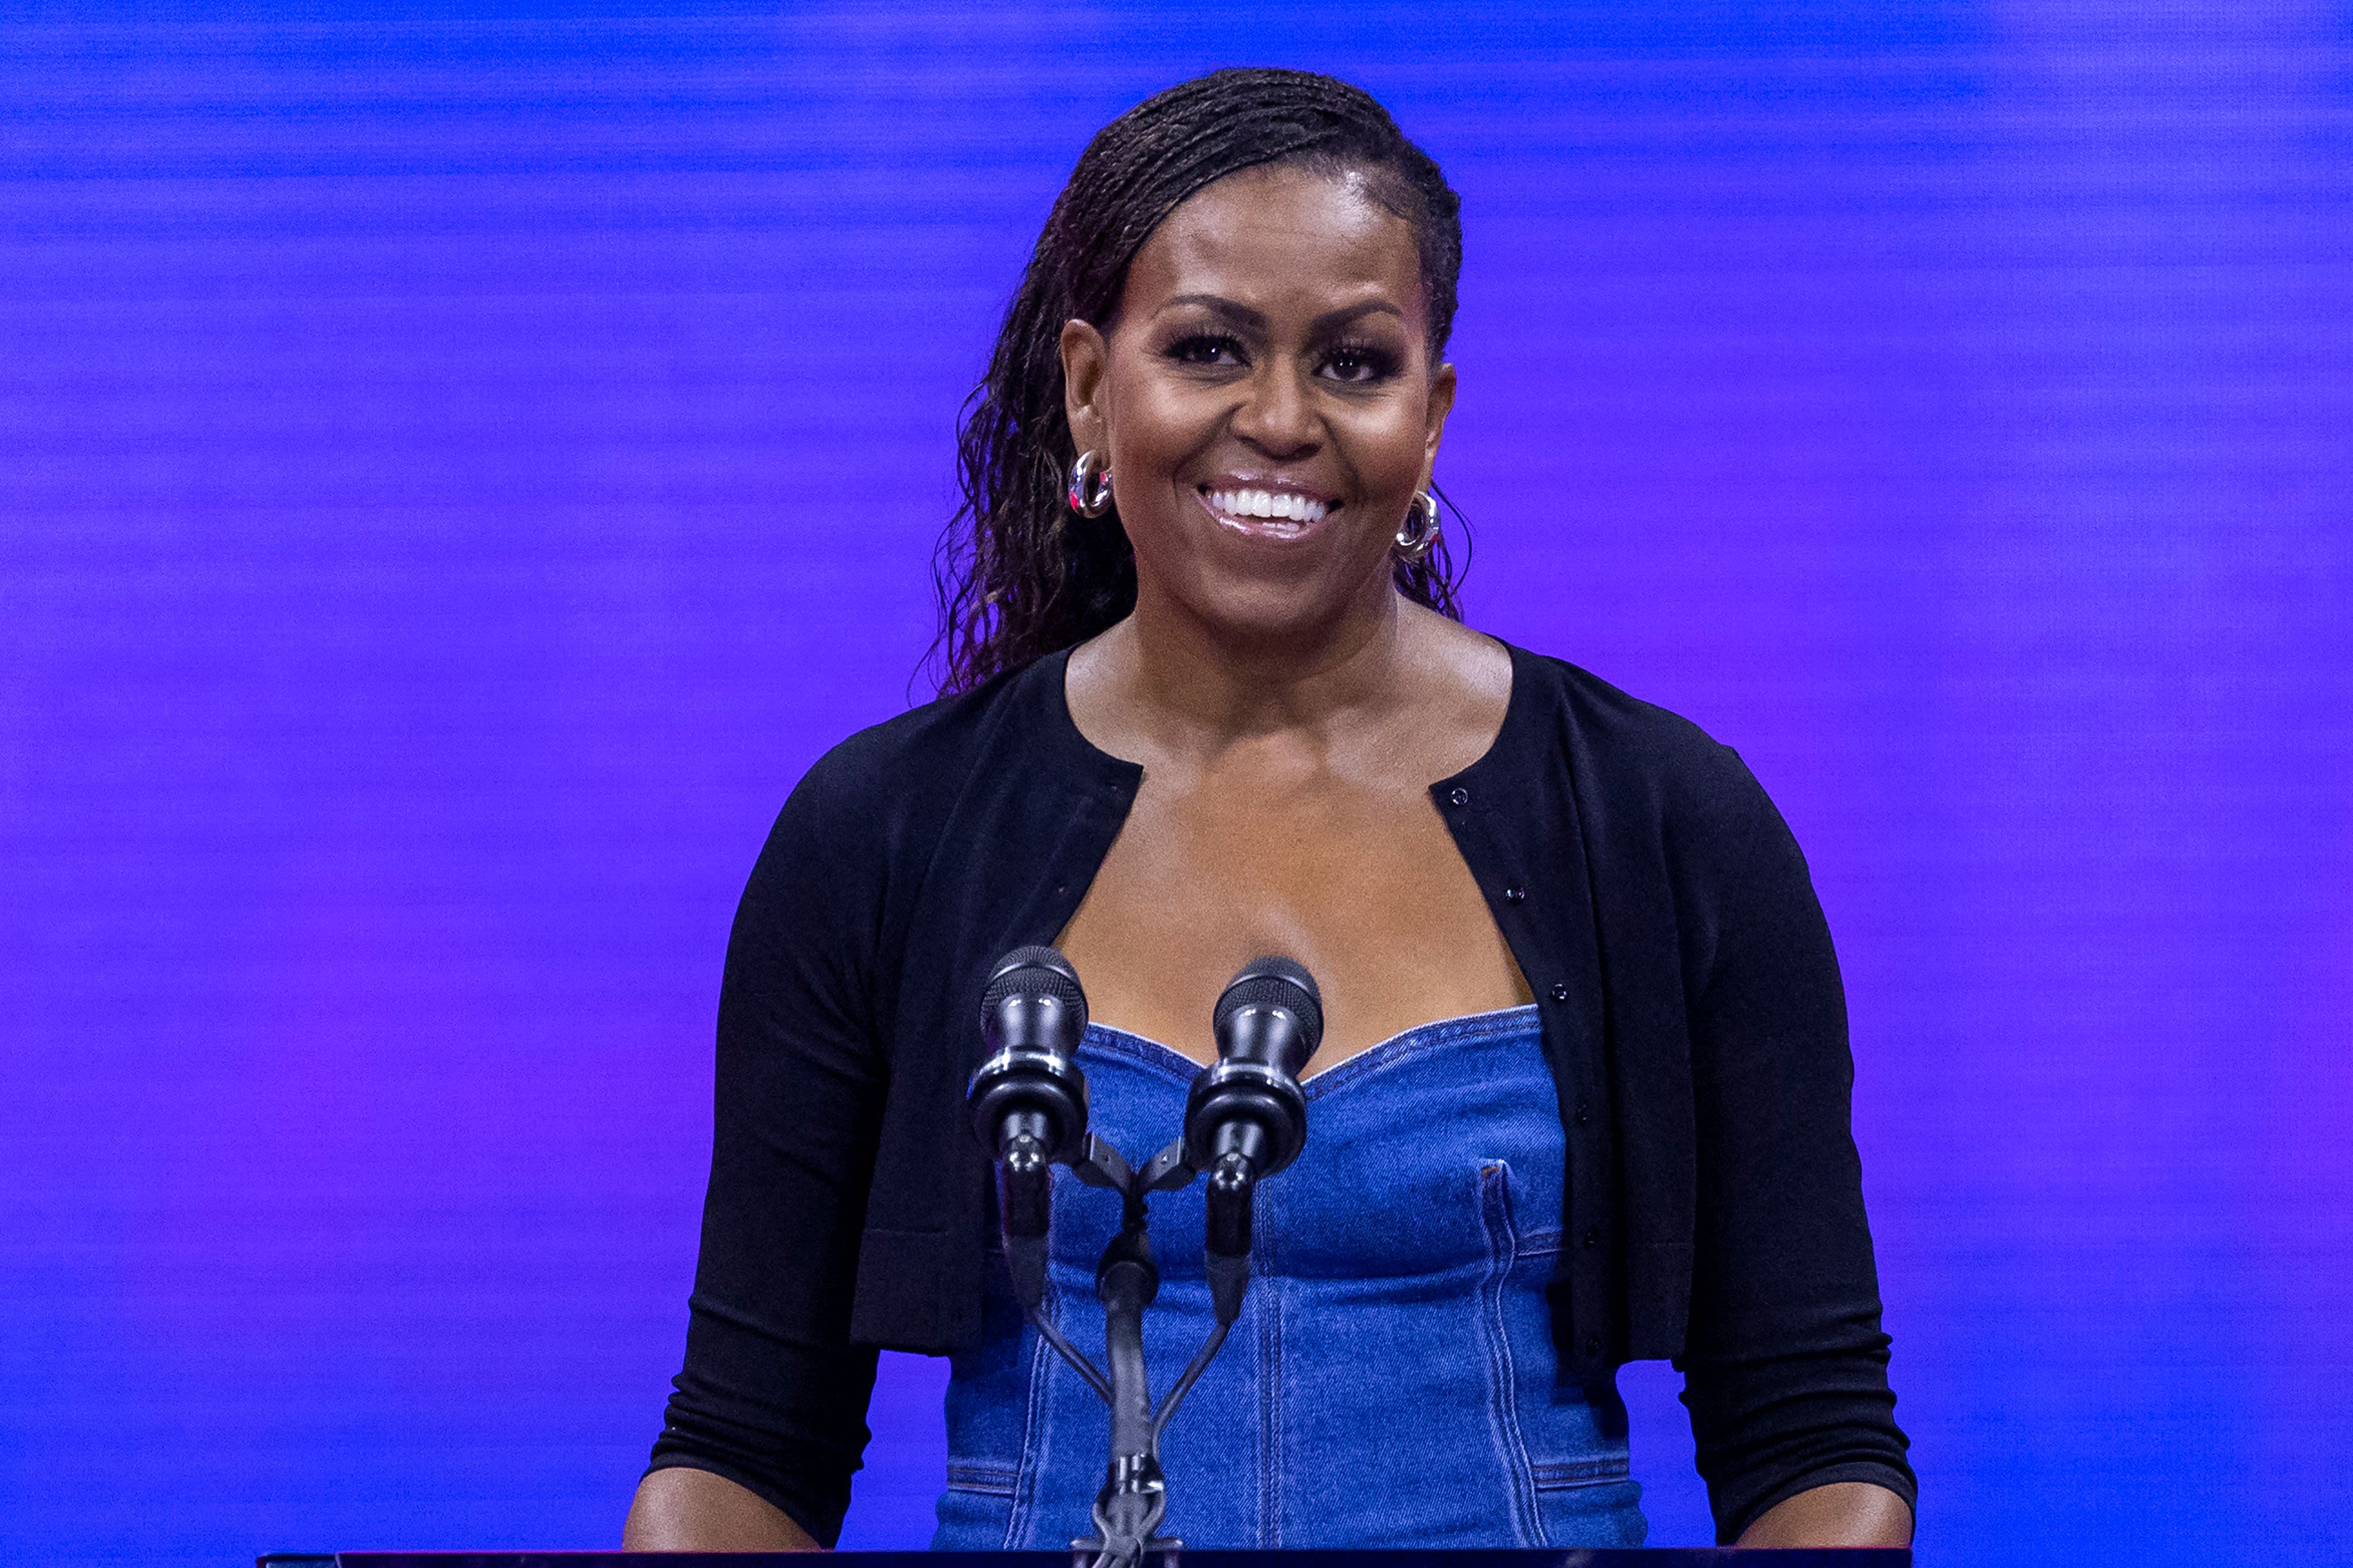 What Michelle Obama has said about running for US president